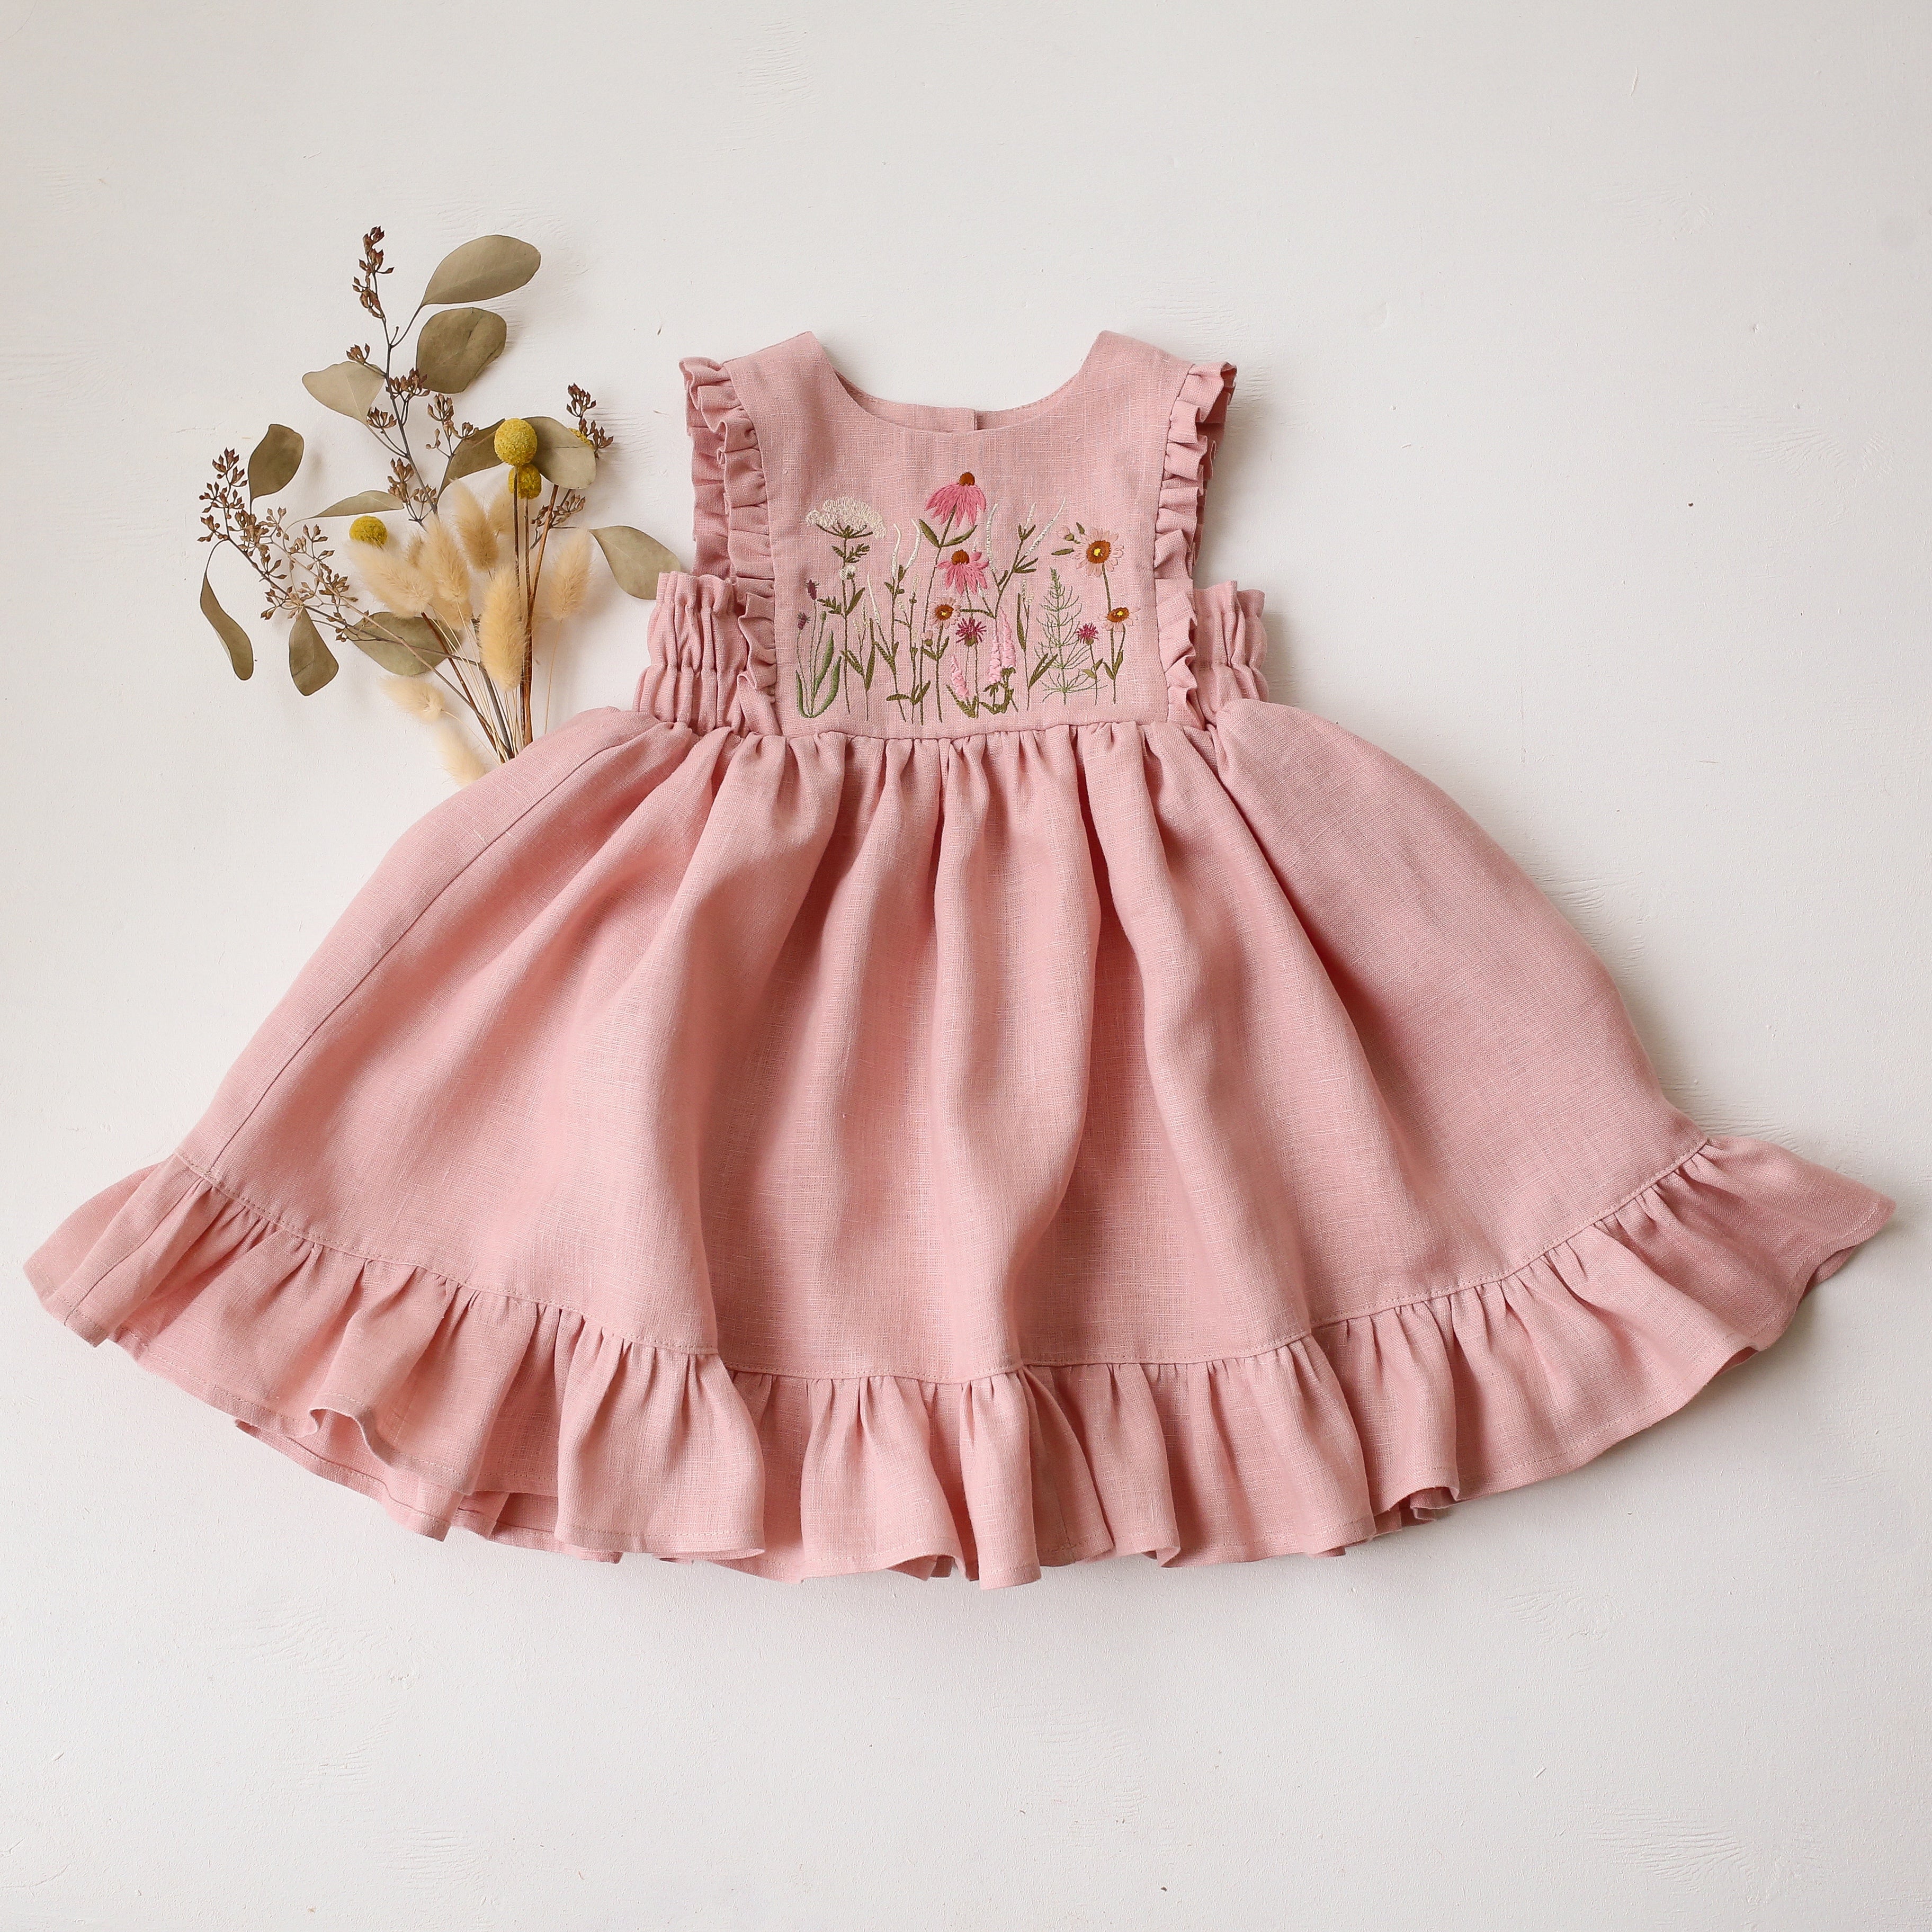 Powder Linen Pinafore Dress with Ruffled Hem with "Echinacea Flowers" Embroidery